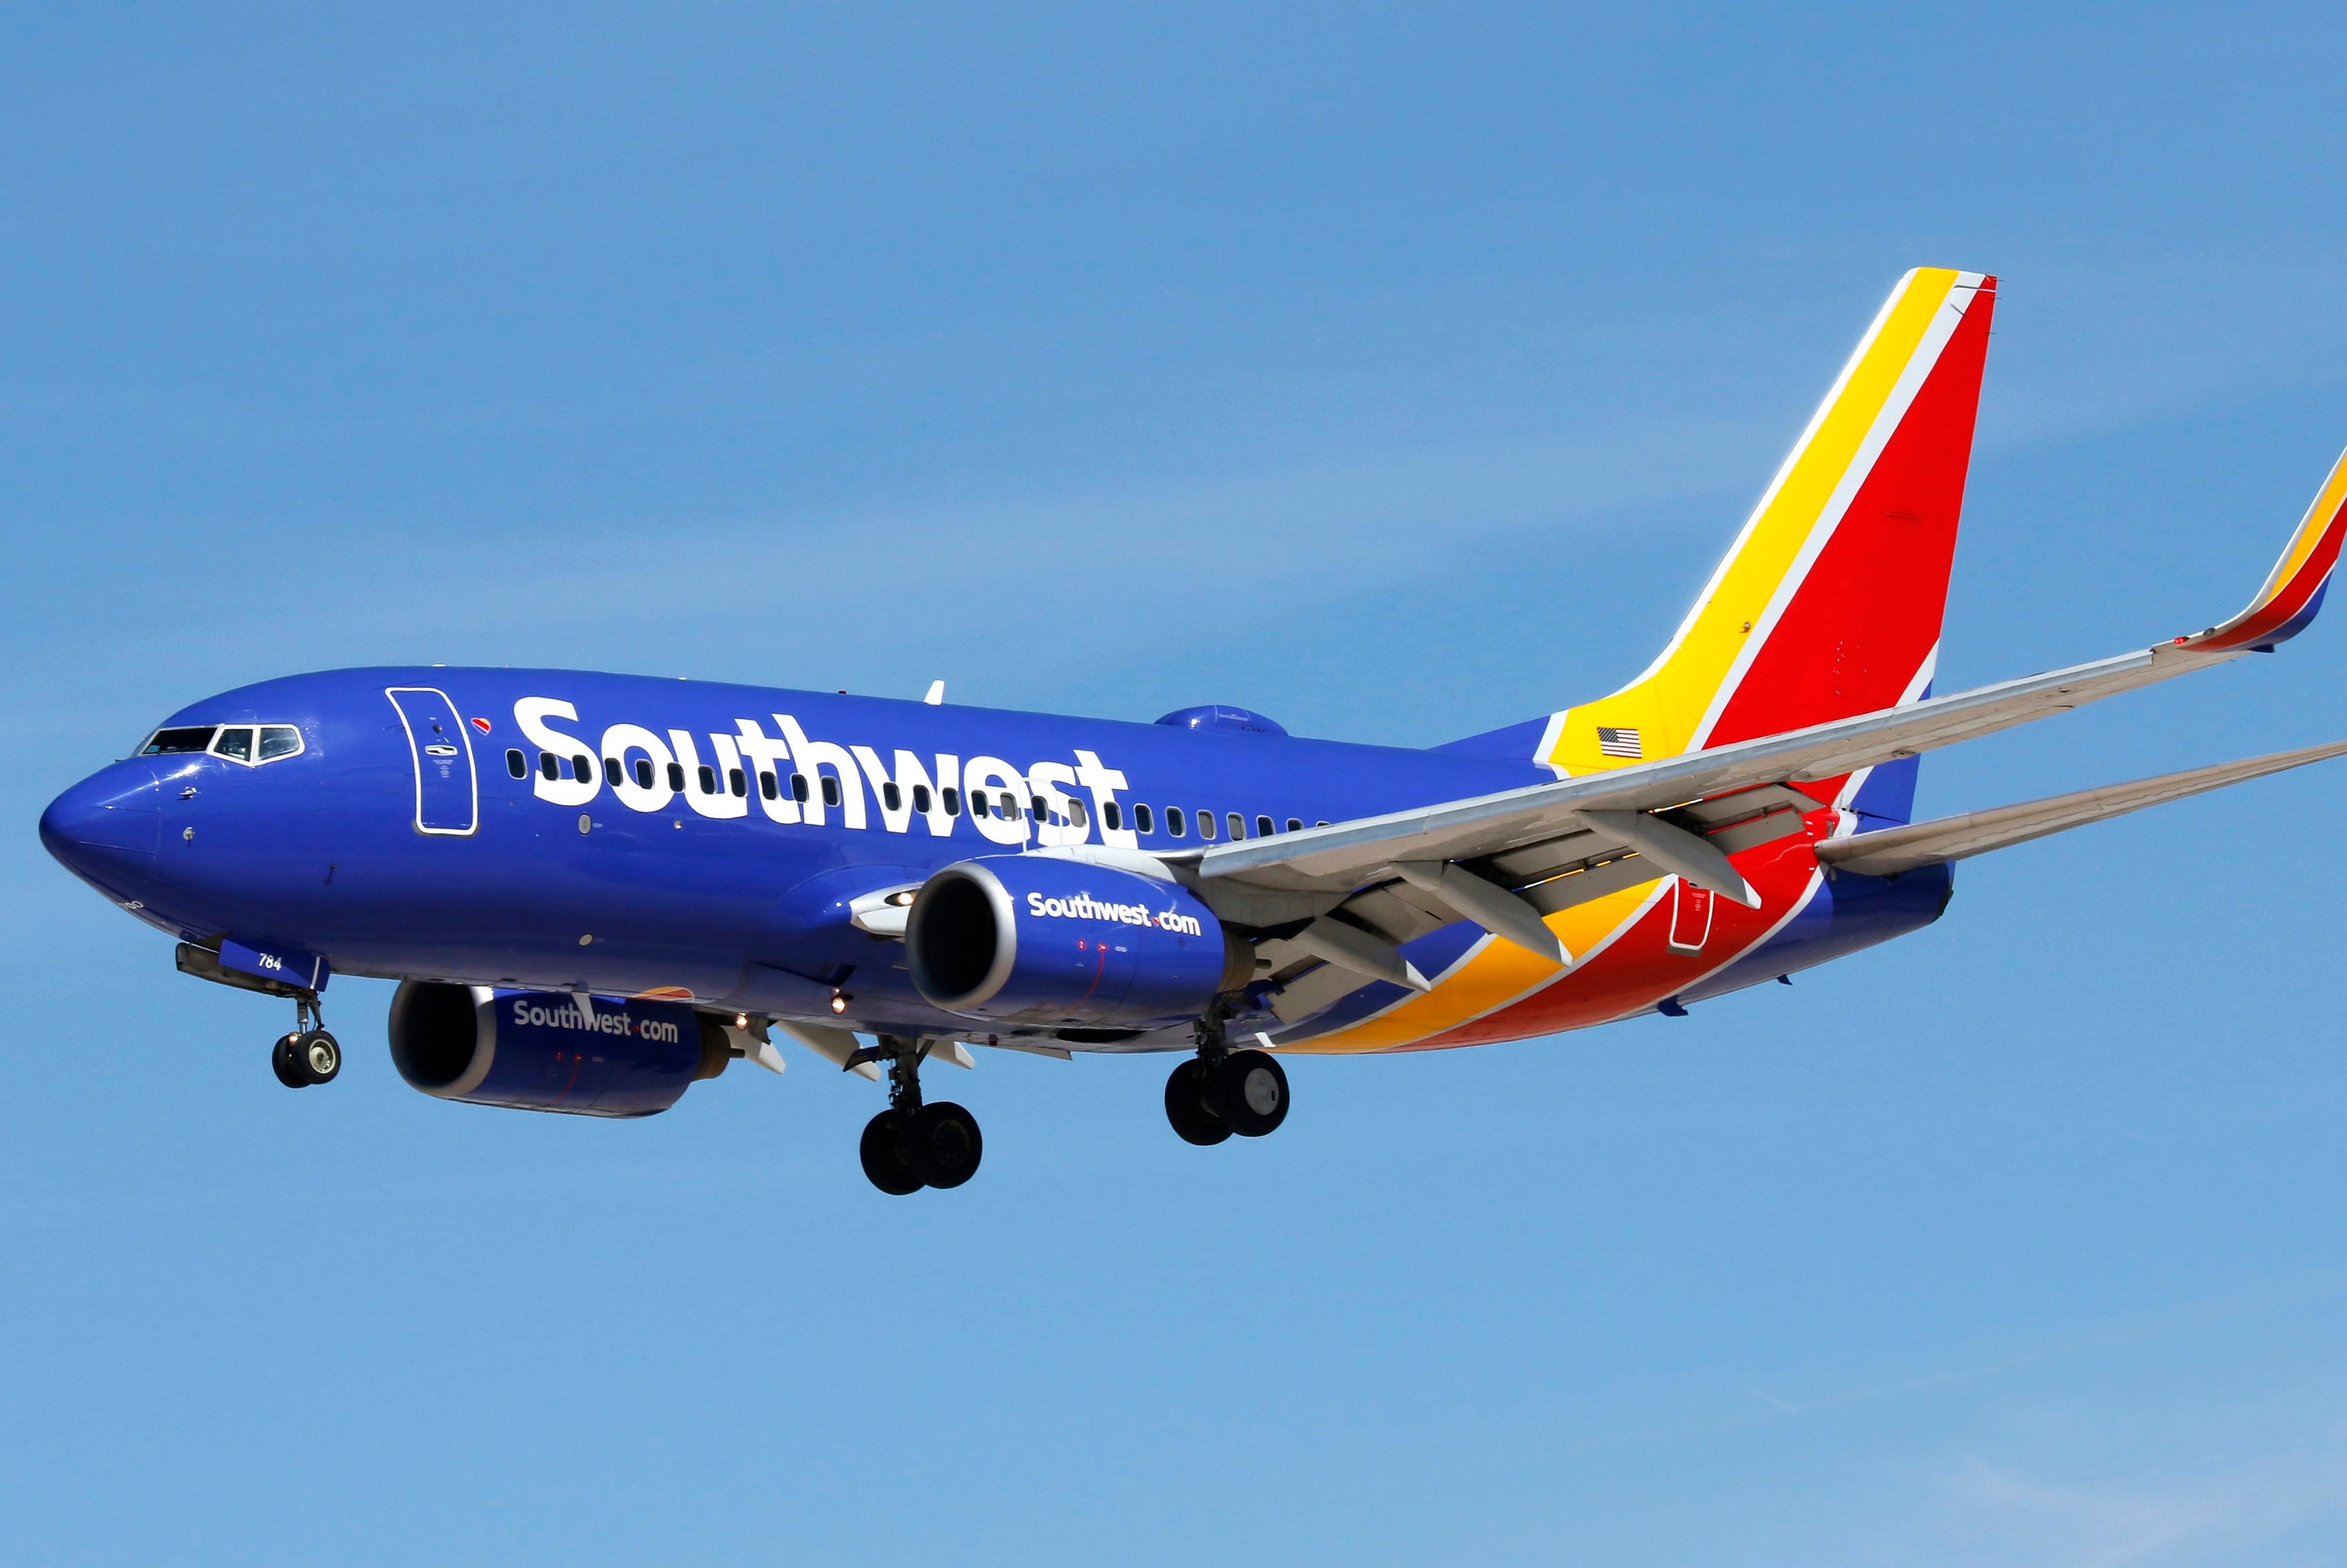 A Boeing 737 (737-700) jetliner, belonging to Southwest Airlines, lands at McCarran International Airport in Las Vegas, Nv., on Tues., March 6, 2018. 